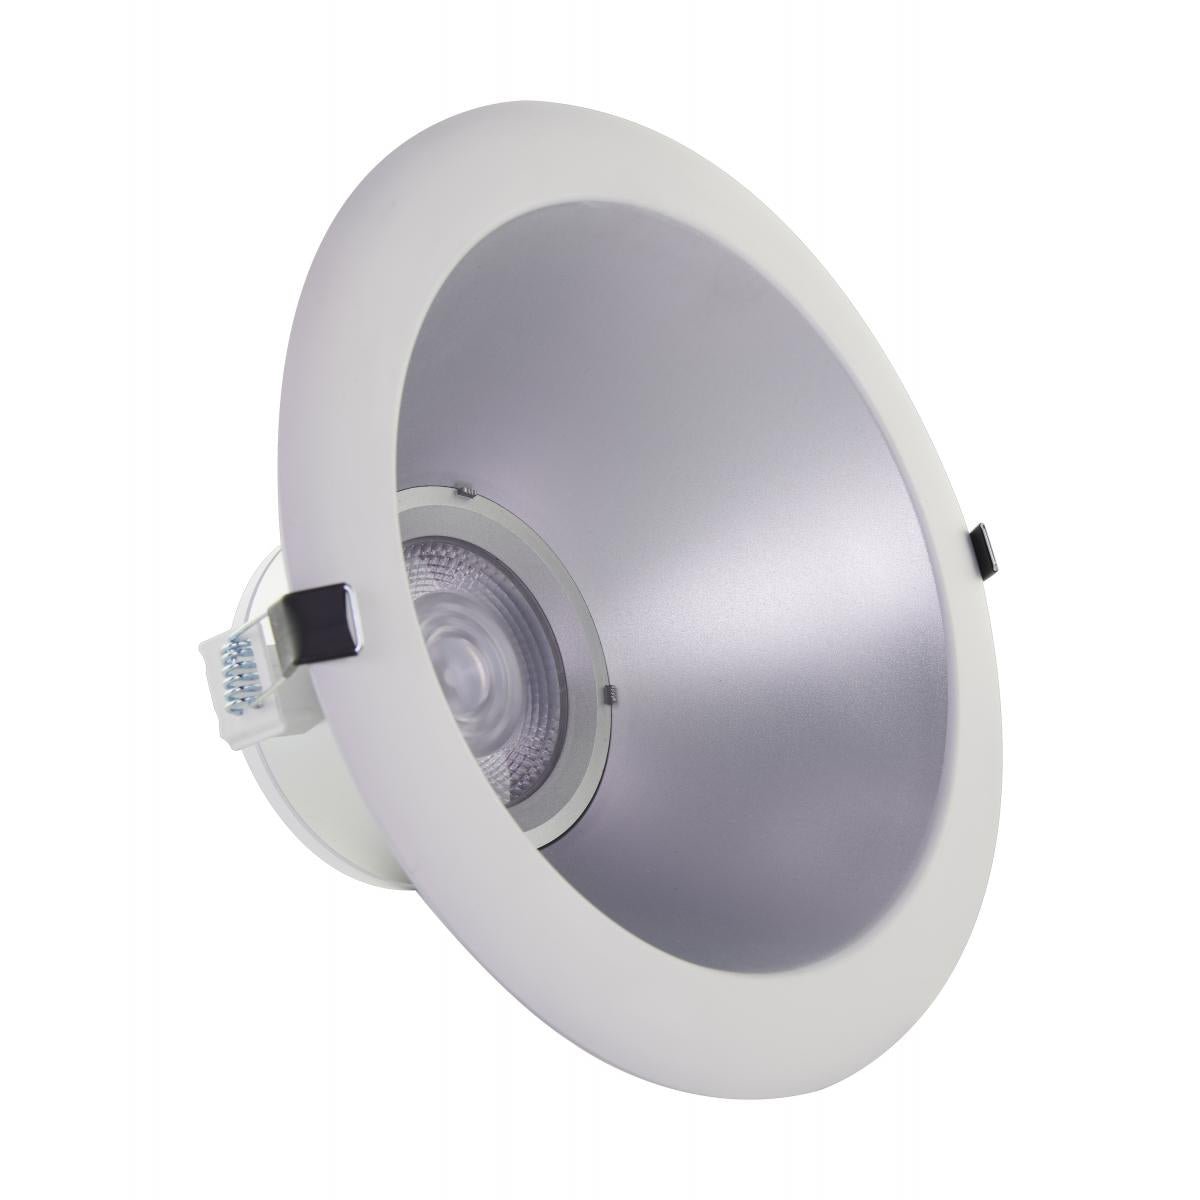 SATCO-S11817SATCO S11813 S11817 46W LED 10" Round Downlight Selectable CCT Selectable Lumen